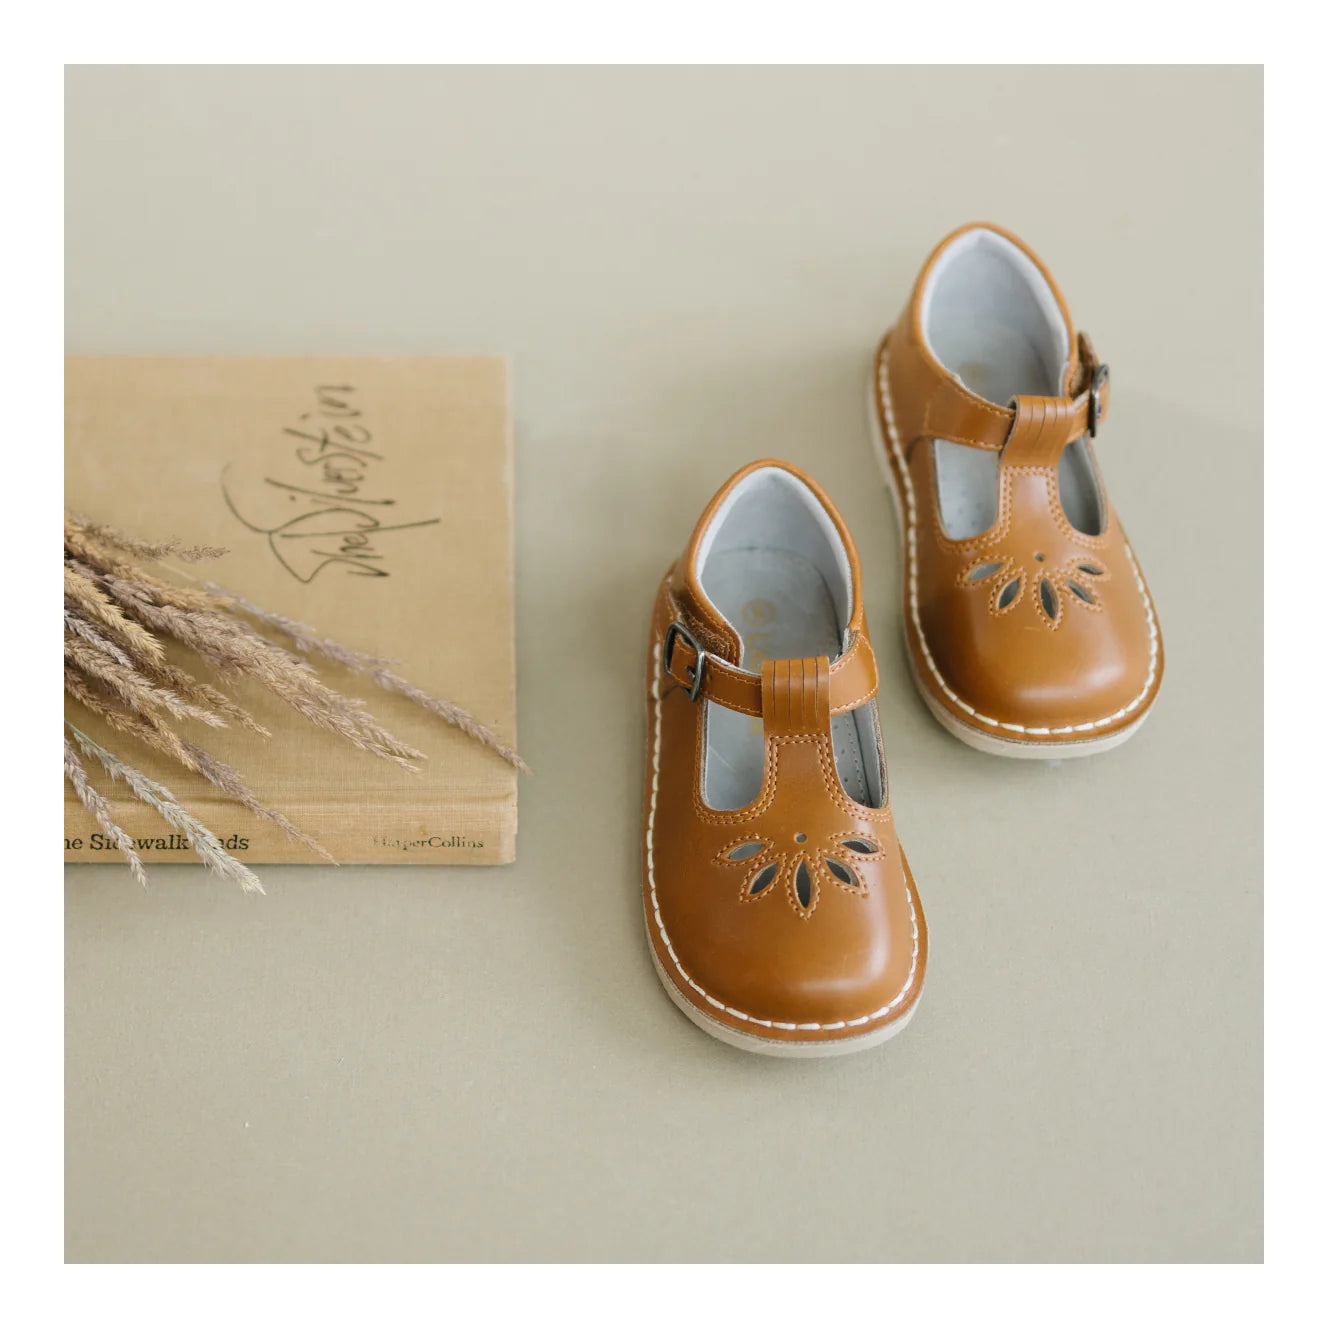 Sienna Appleseed Mary Jane Shoe in Camel  - Doodlebug's Children's Boutique